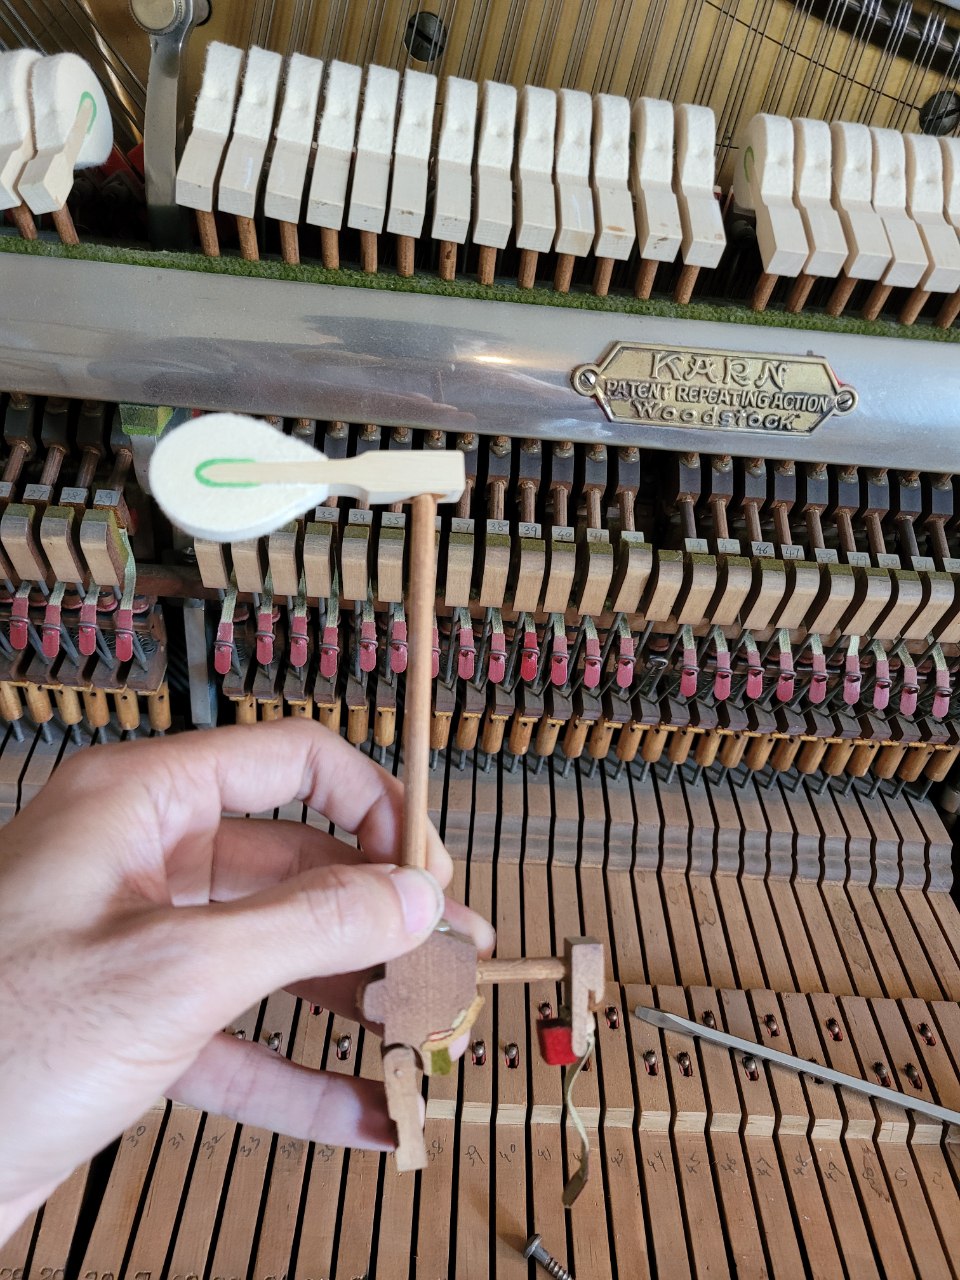 Piano repair services and tuning